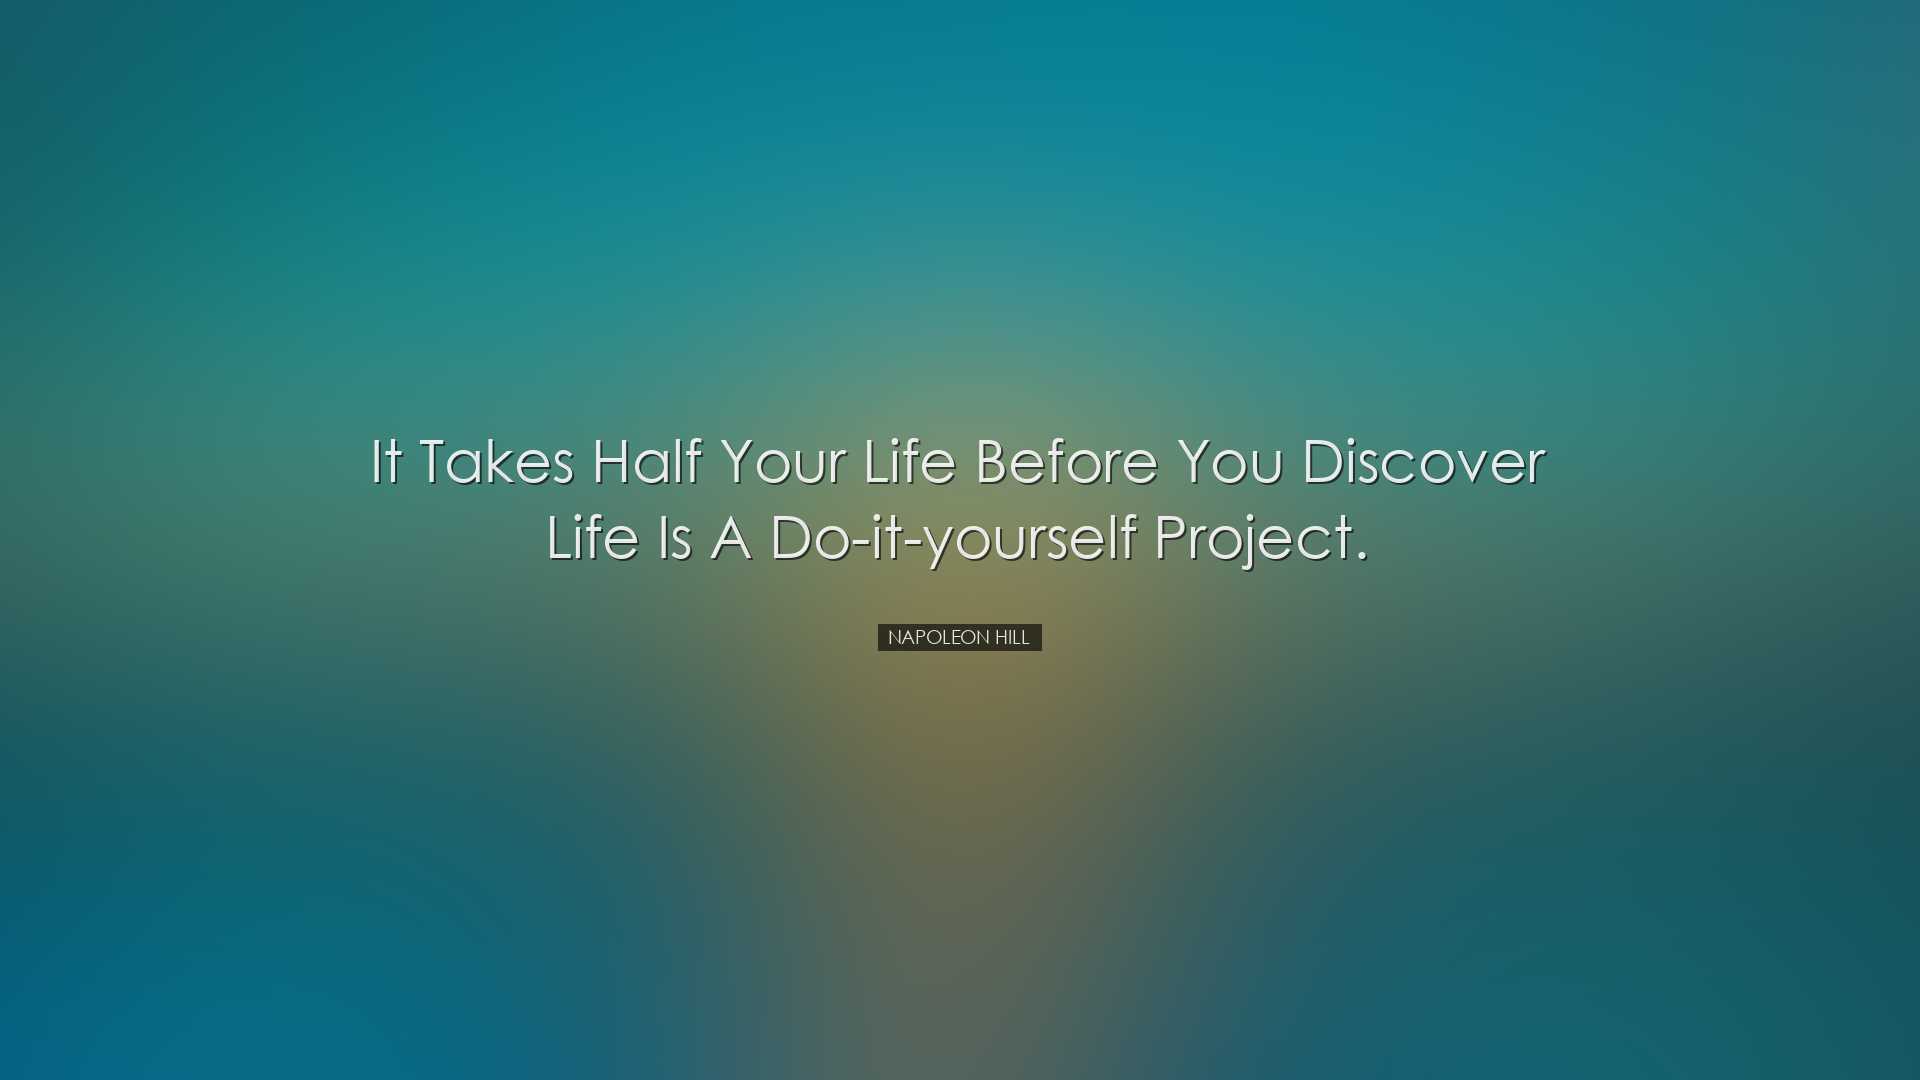 It takes half your life before you discover life is a do-it-yourse